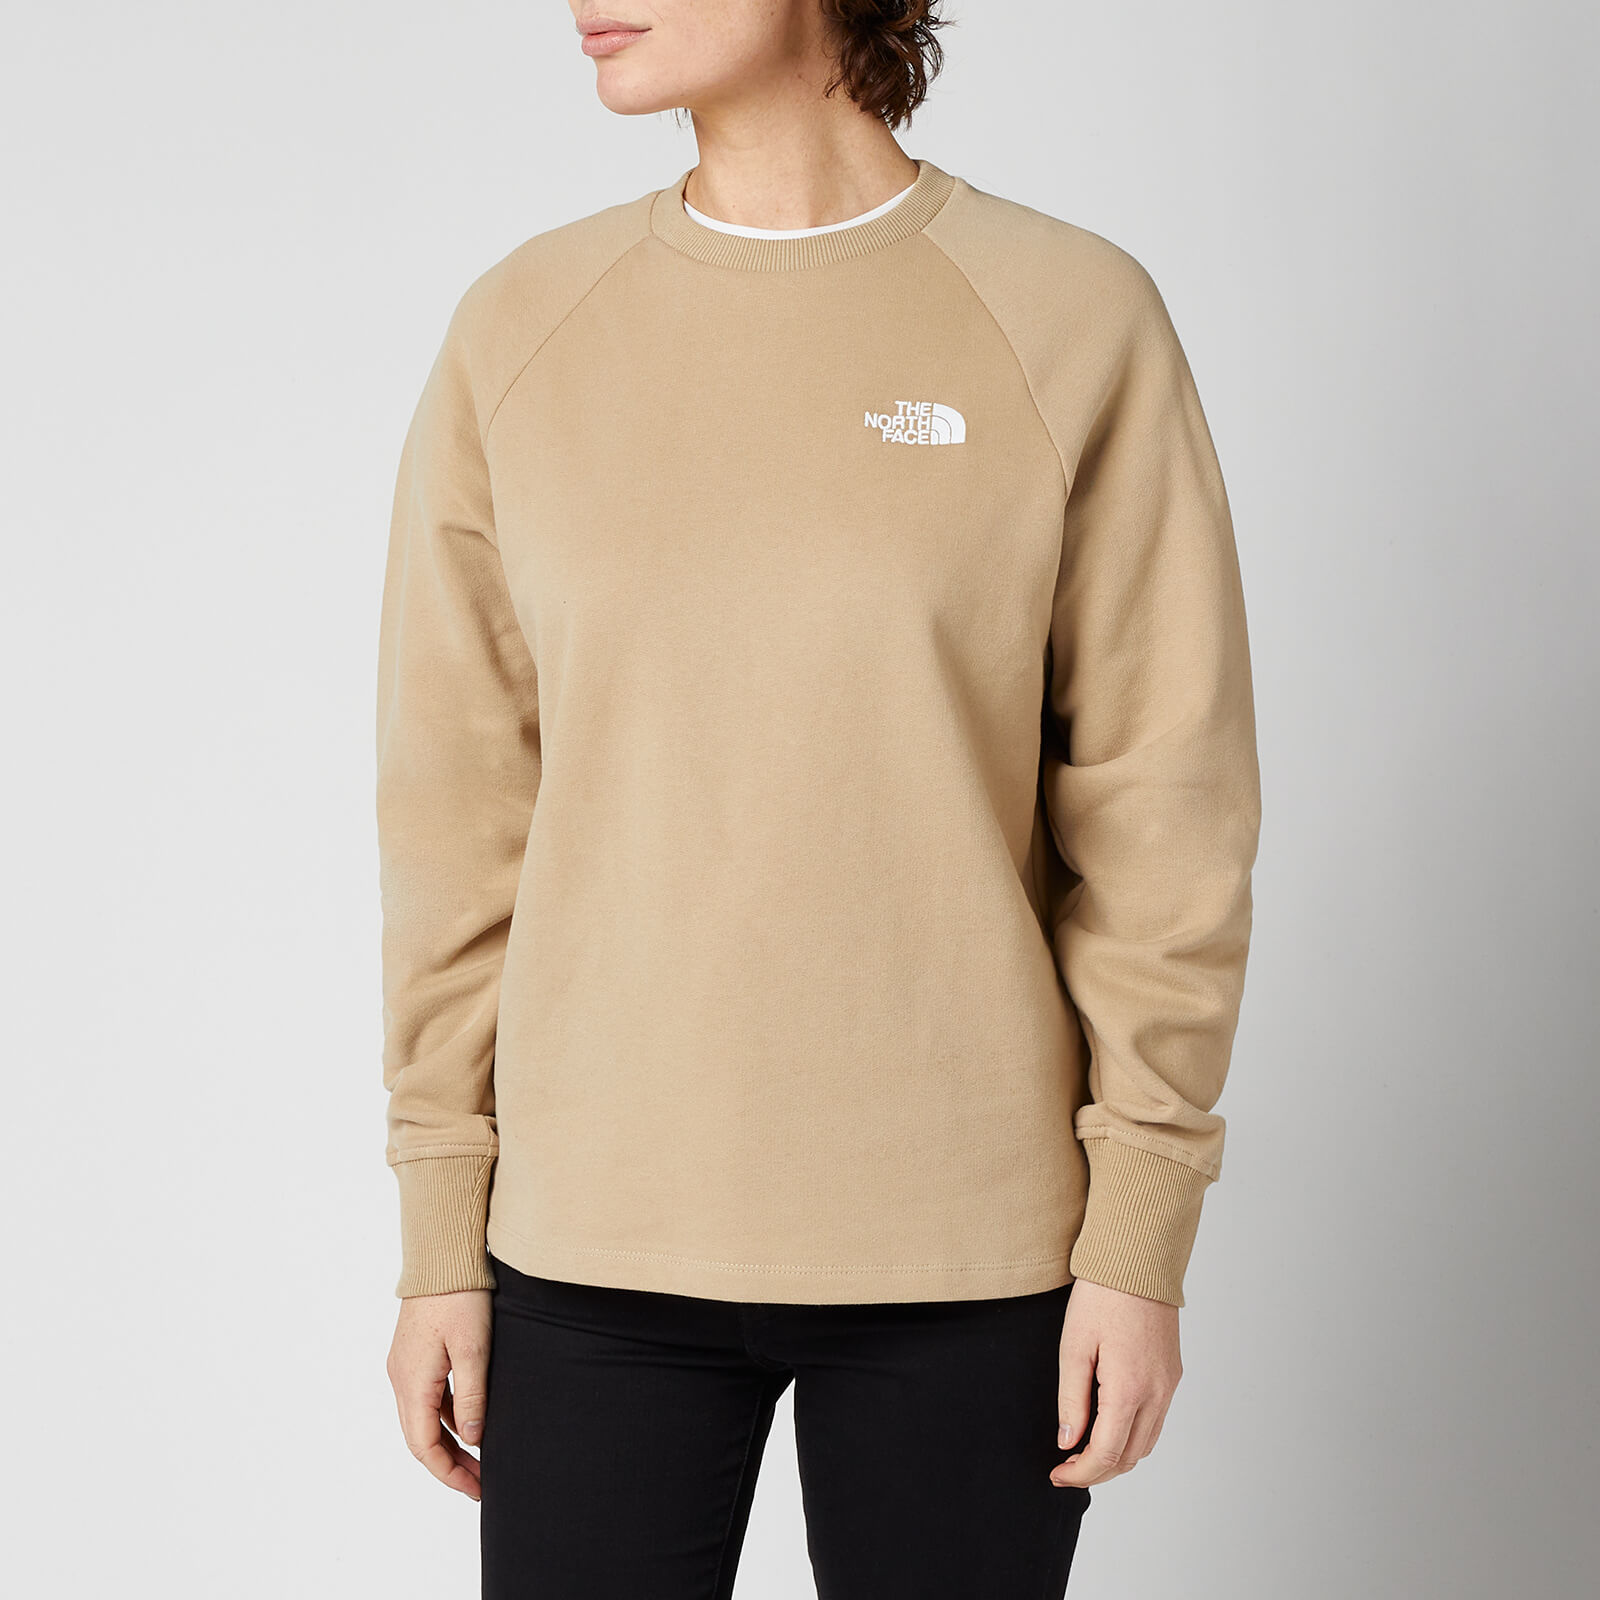 The North Face Women's Oversized Crew - Beige - XS